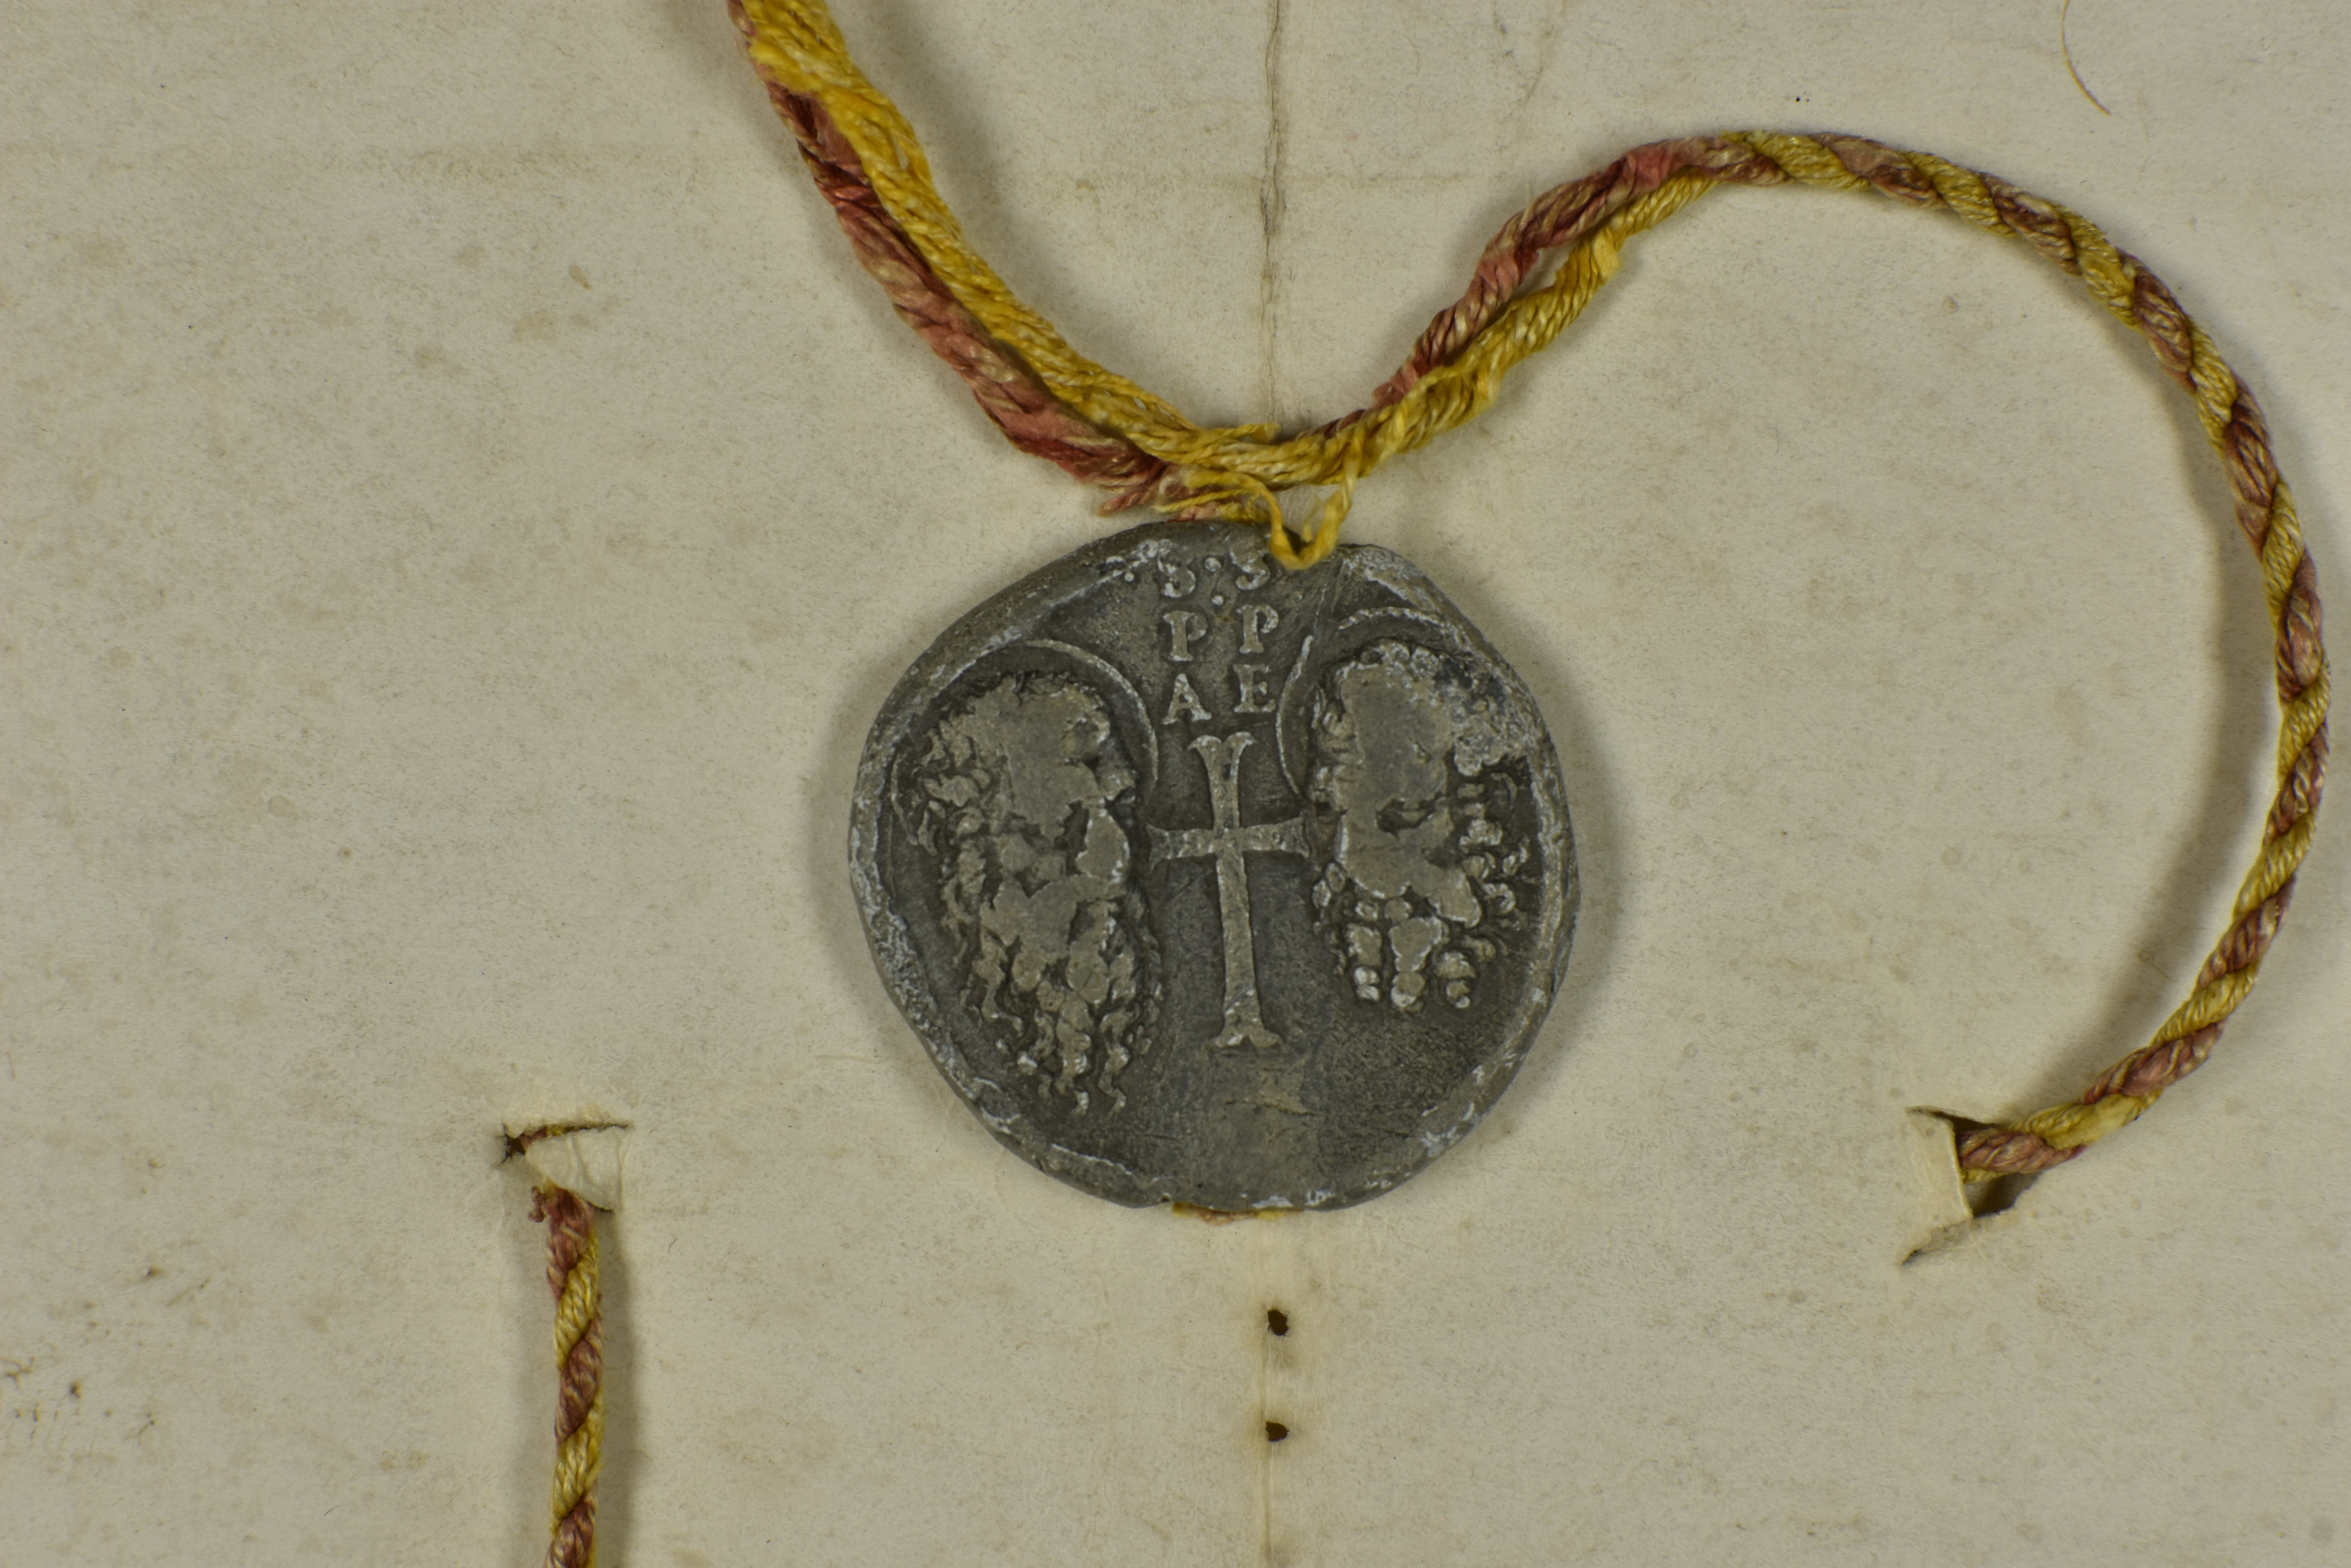 Lead seal (38 mm) is attached on a string. The obverse depicts the heads of Sts. Peter and Paul and the Cross and contains the inscription: S, P, A and S, P, E.